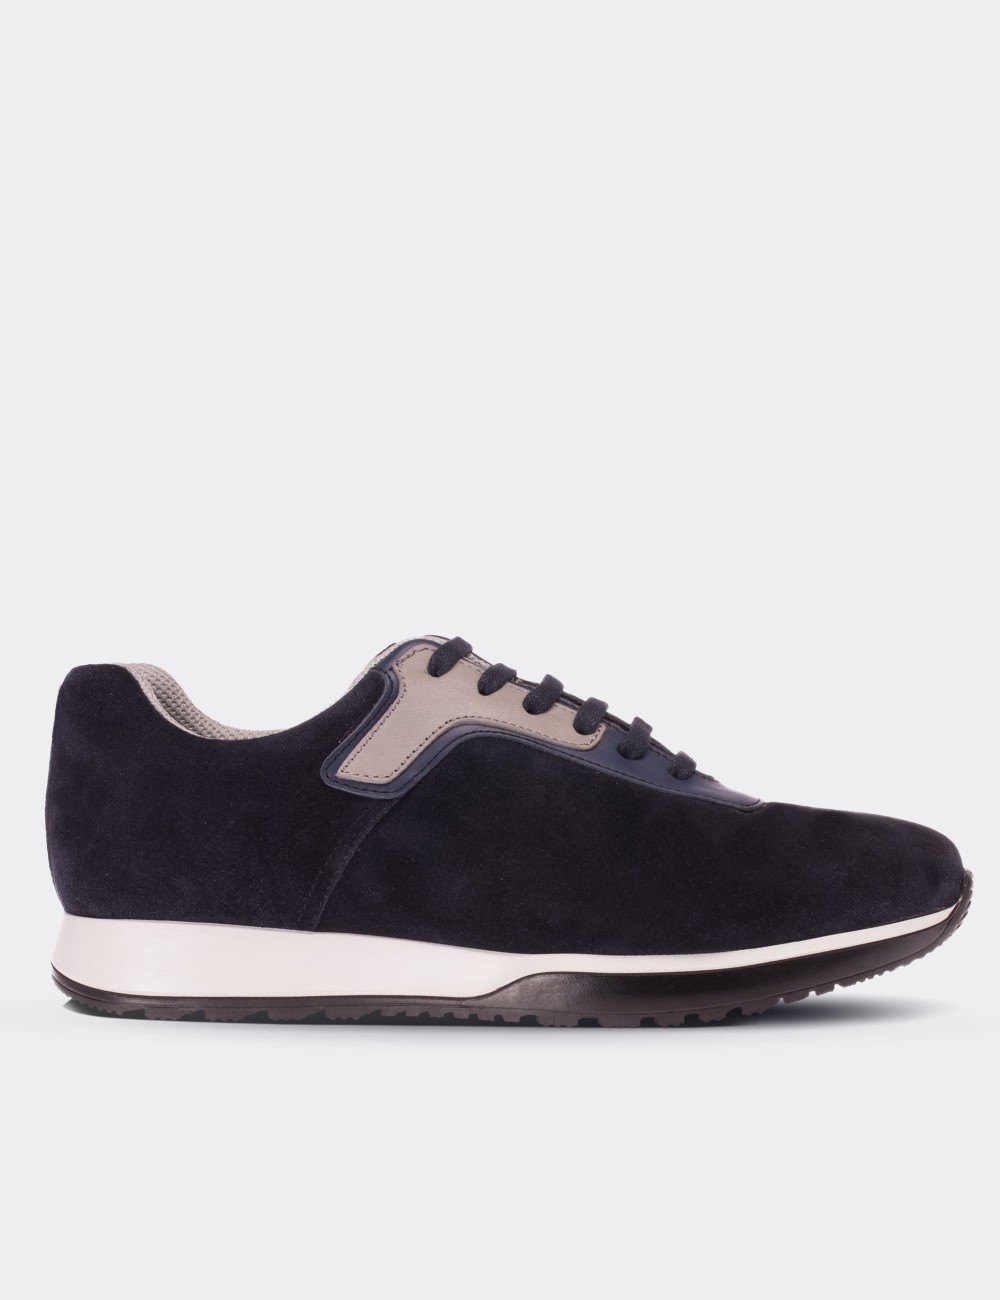 Navy Suede Leather  Sneakers - 01730MLCVT01